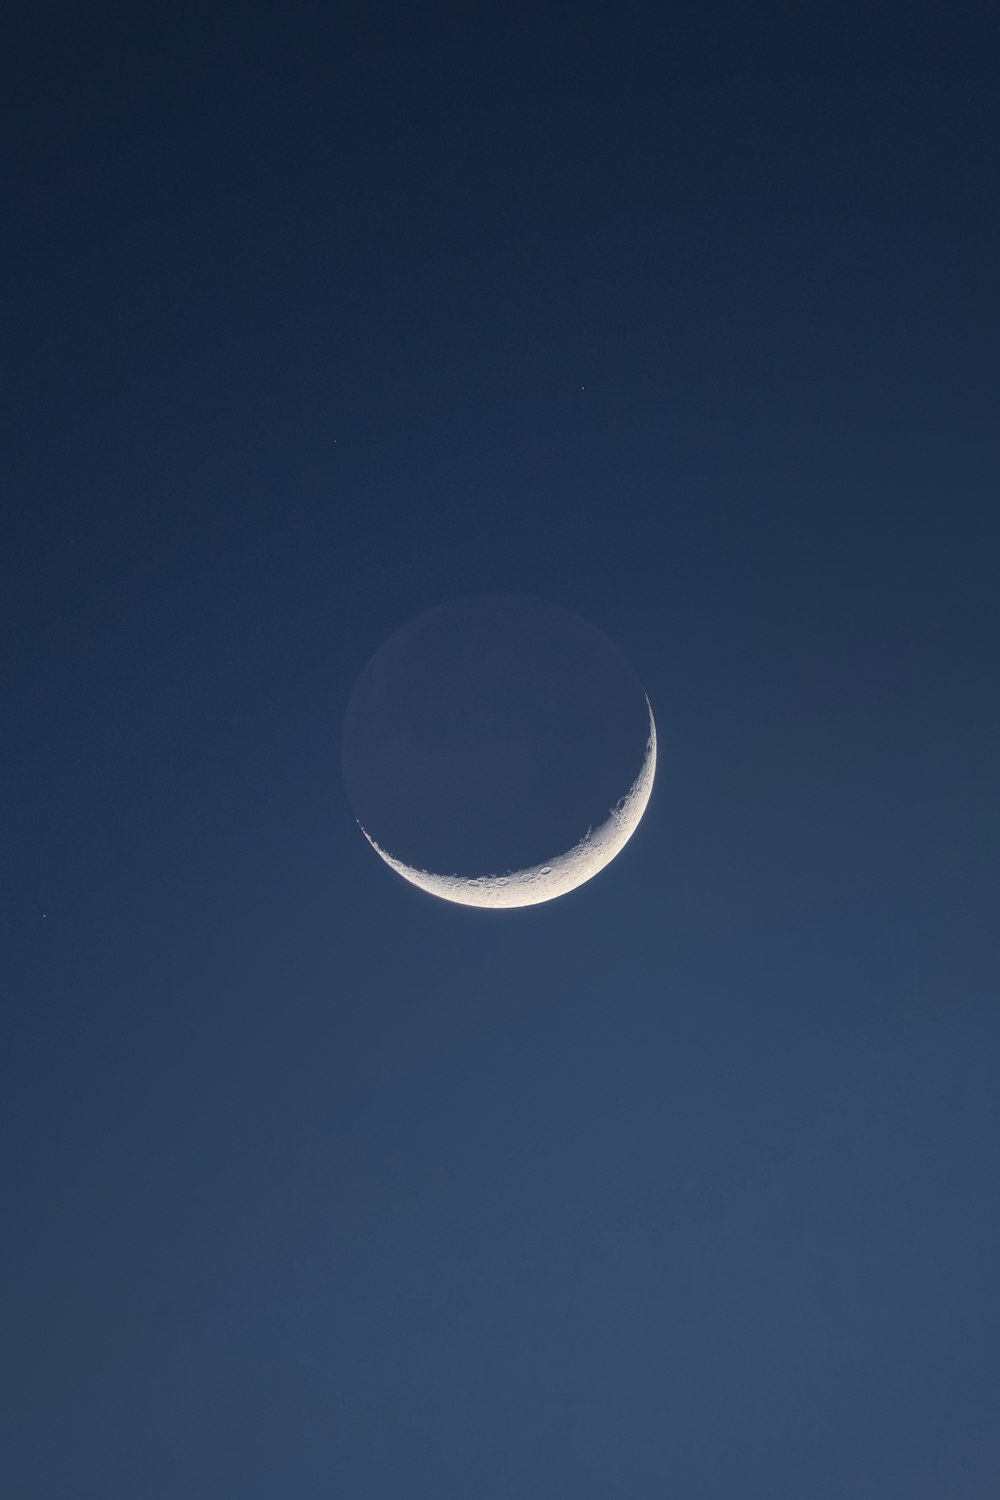 a crescent moon in a clear blue sky